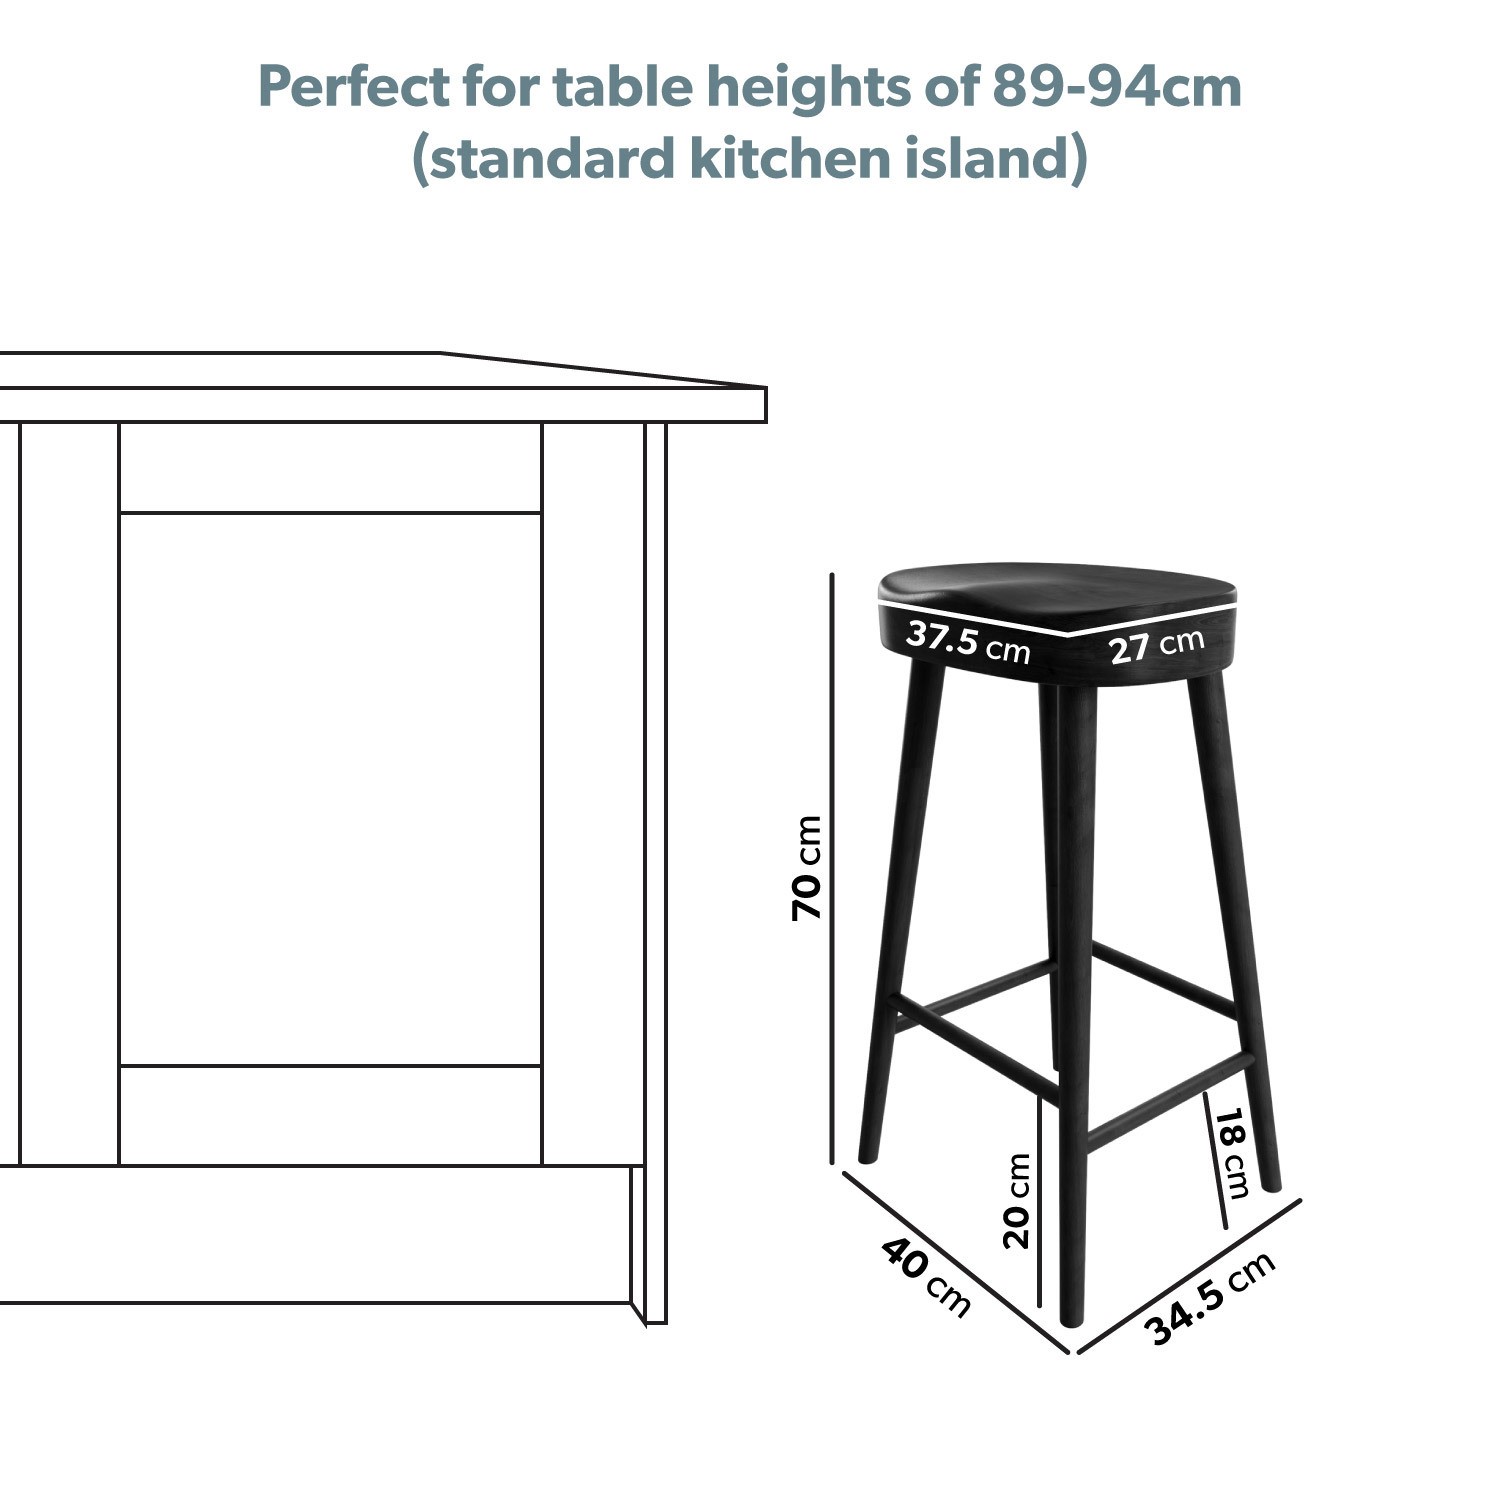 Read more about Set of 2 black solid oak kitchen stools 70cm rayne